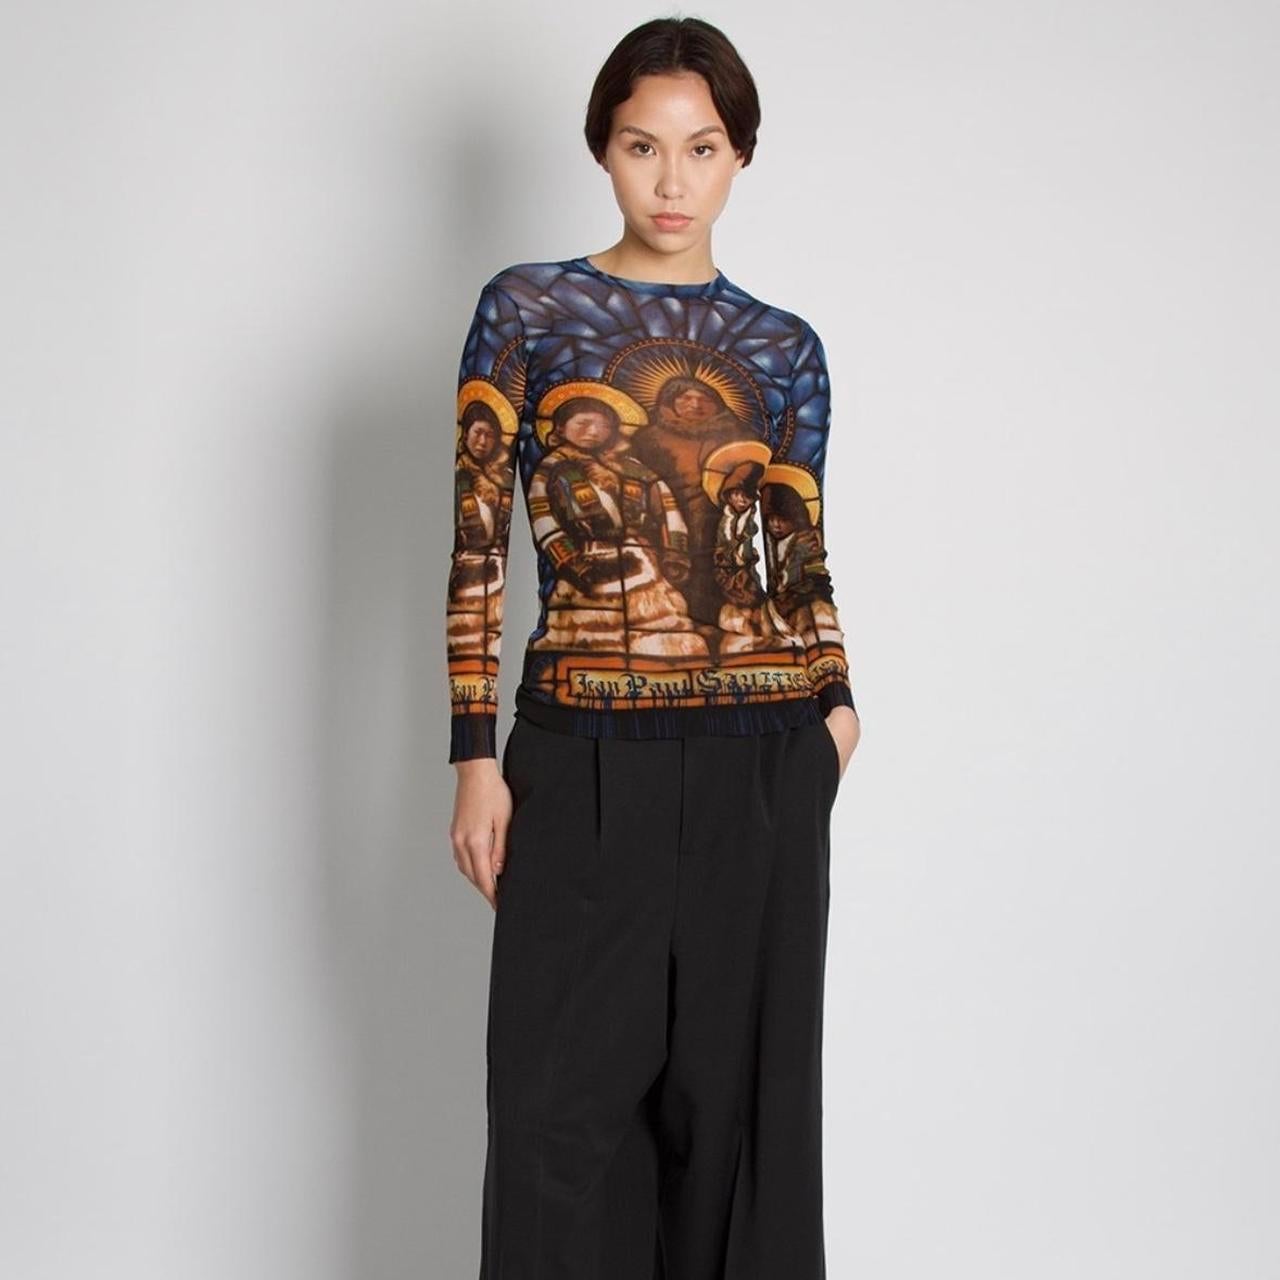 Jean Paul Gaultier Stained Glass Saint Print Mesh Long Sleeve Top For Sale 3